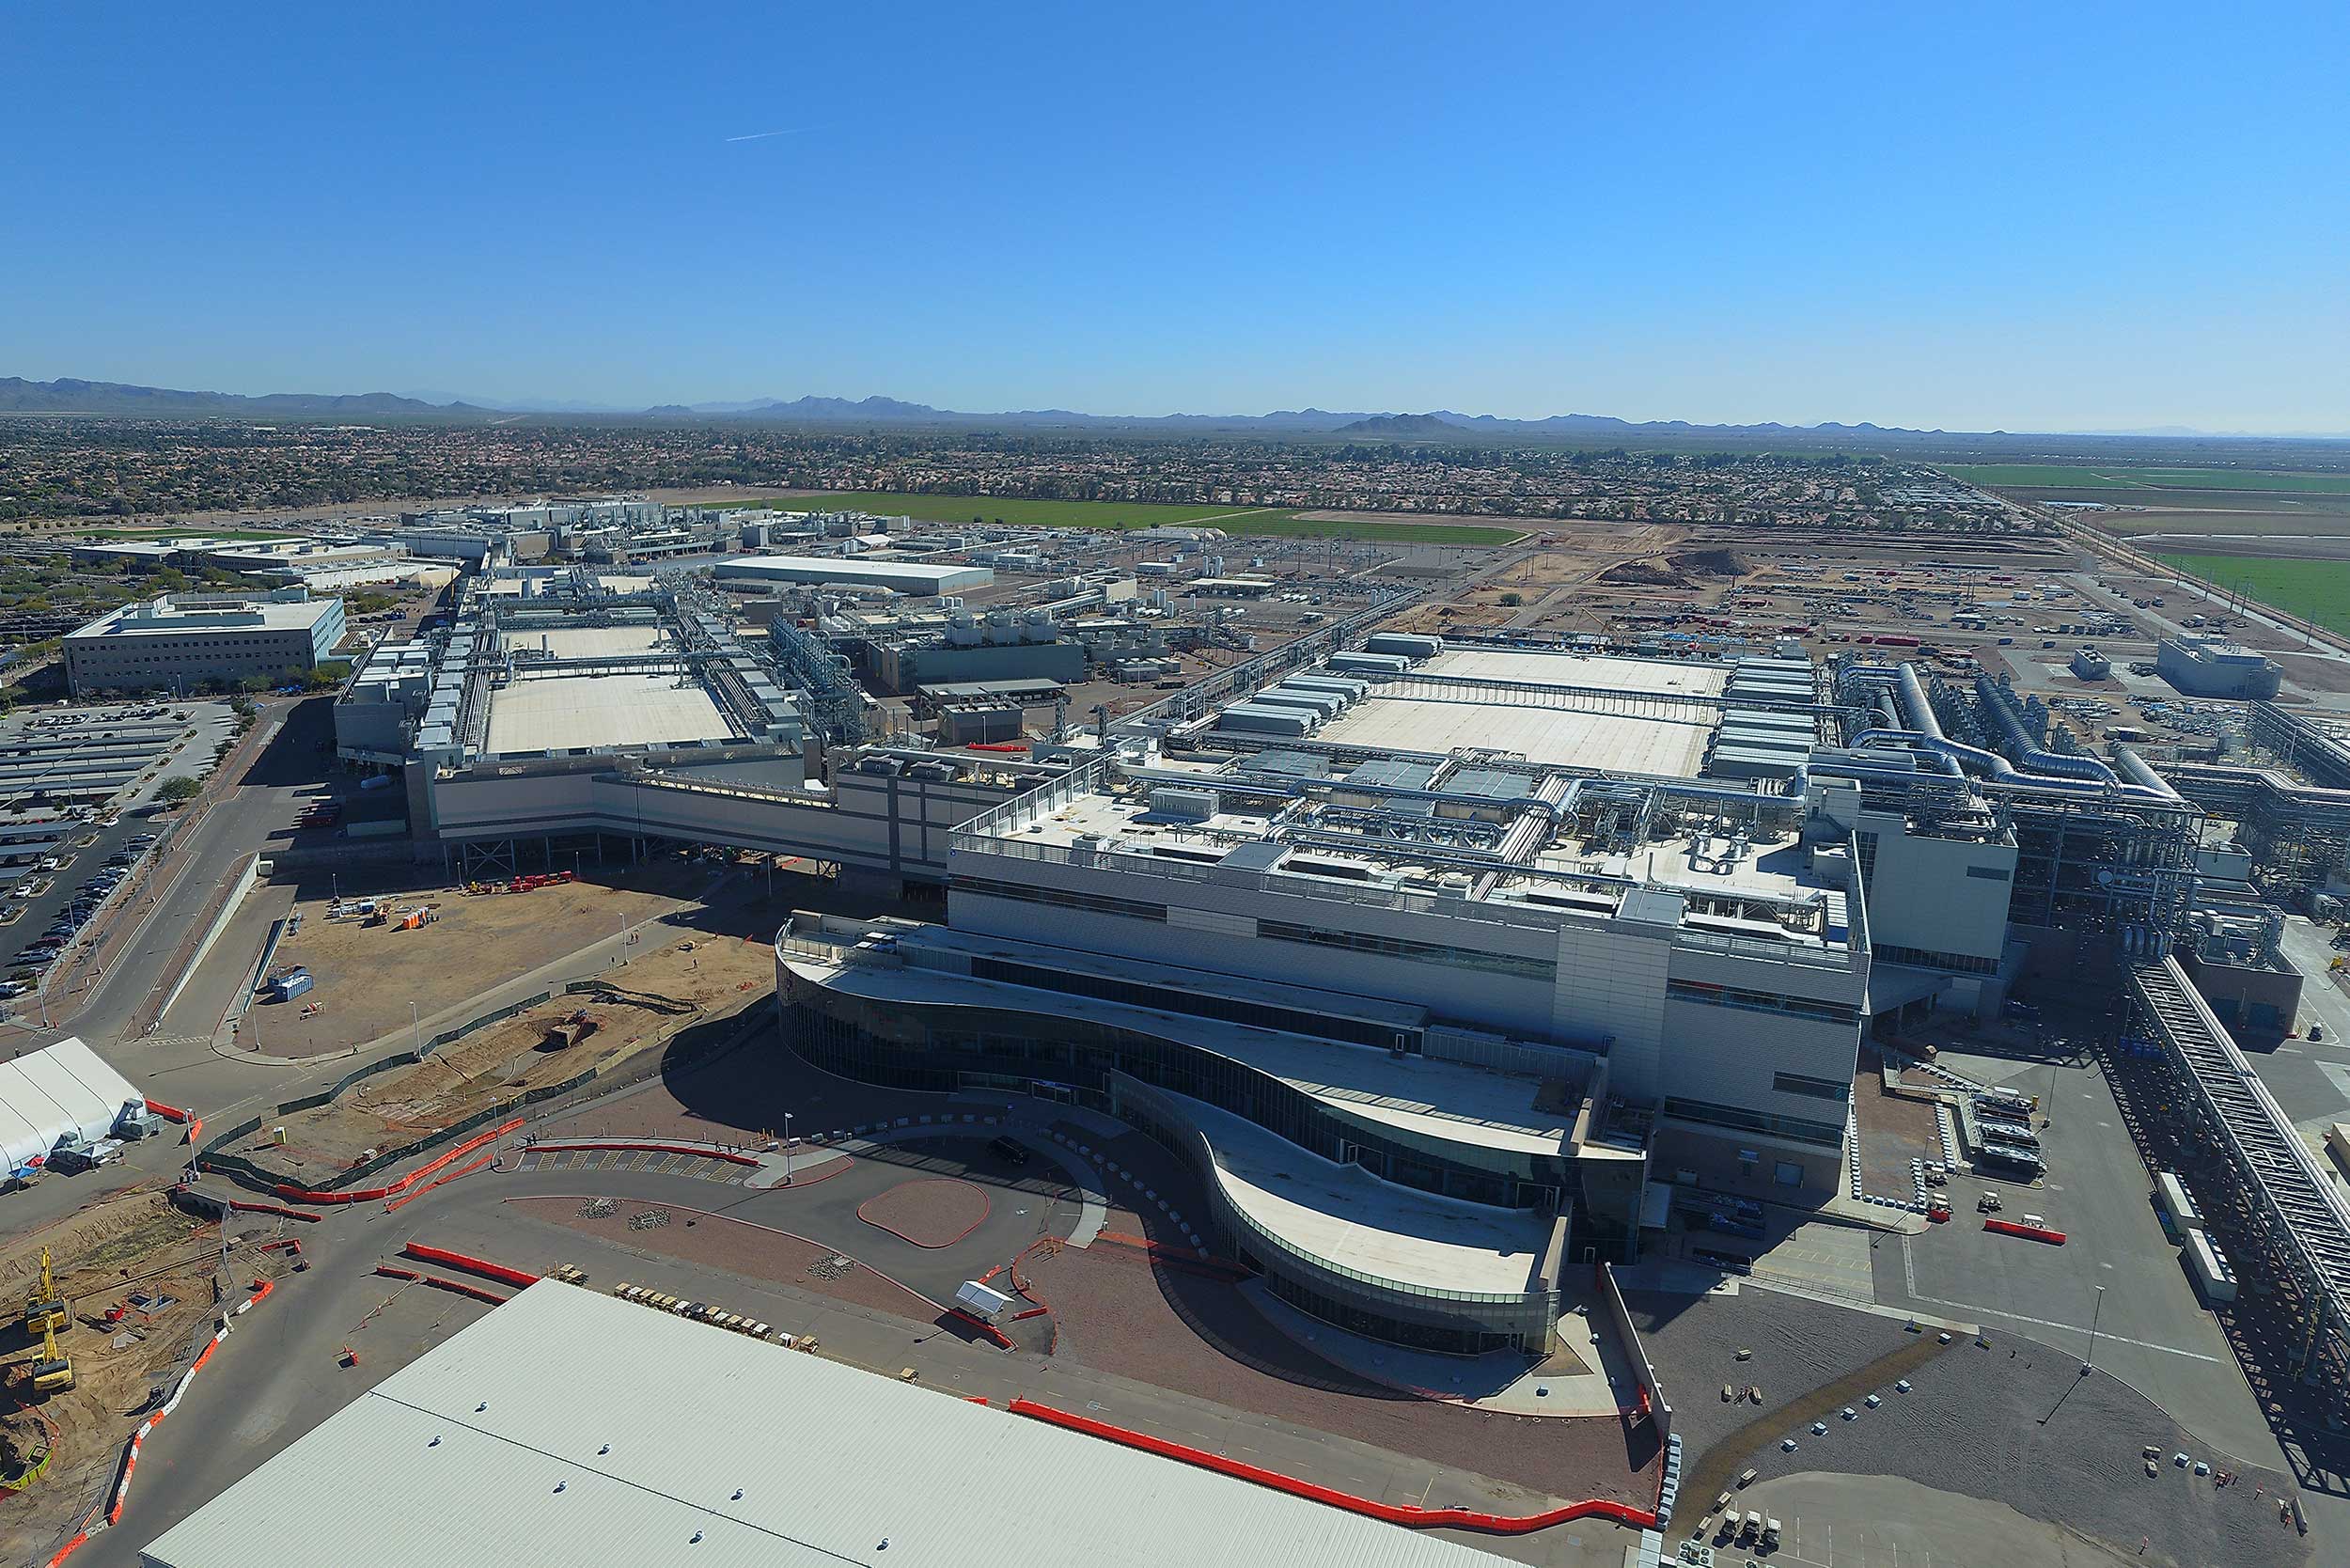 Aerial view of Intel's Fab 42 semiconductor manufacturing facility in Chandler, Arizona